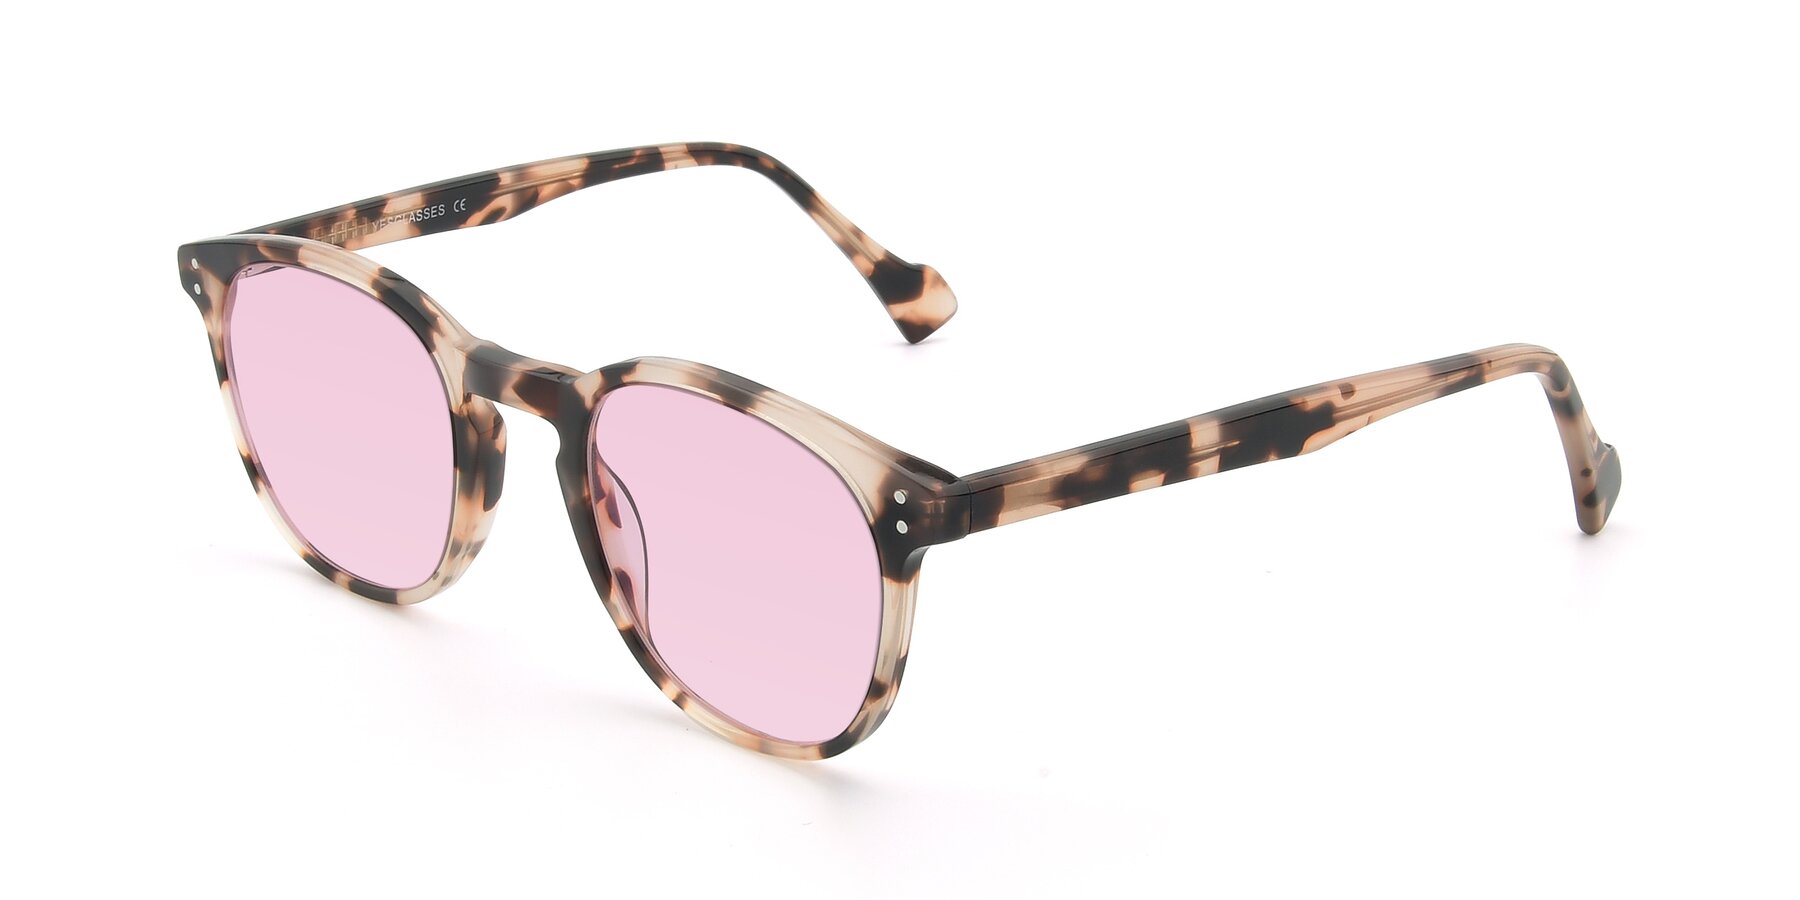 Angle of 17293 in Tortoise with Light Pink Tinted Lenses